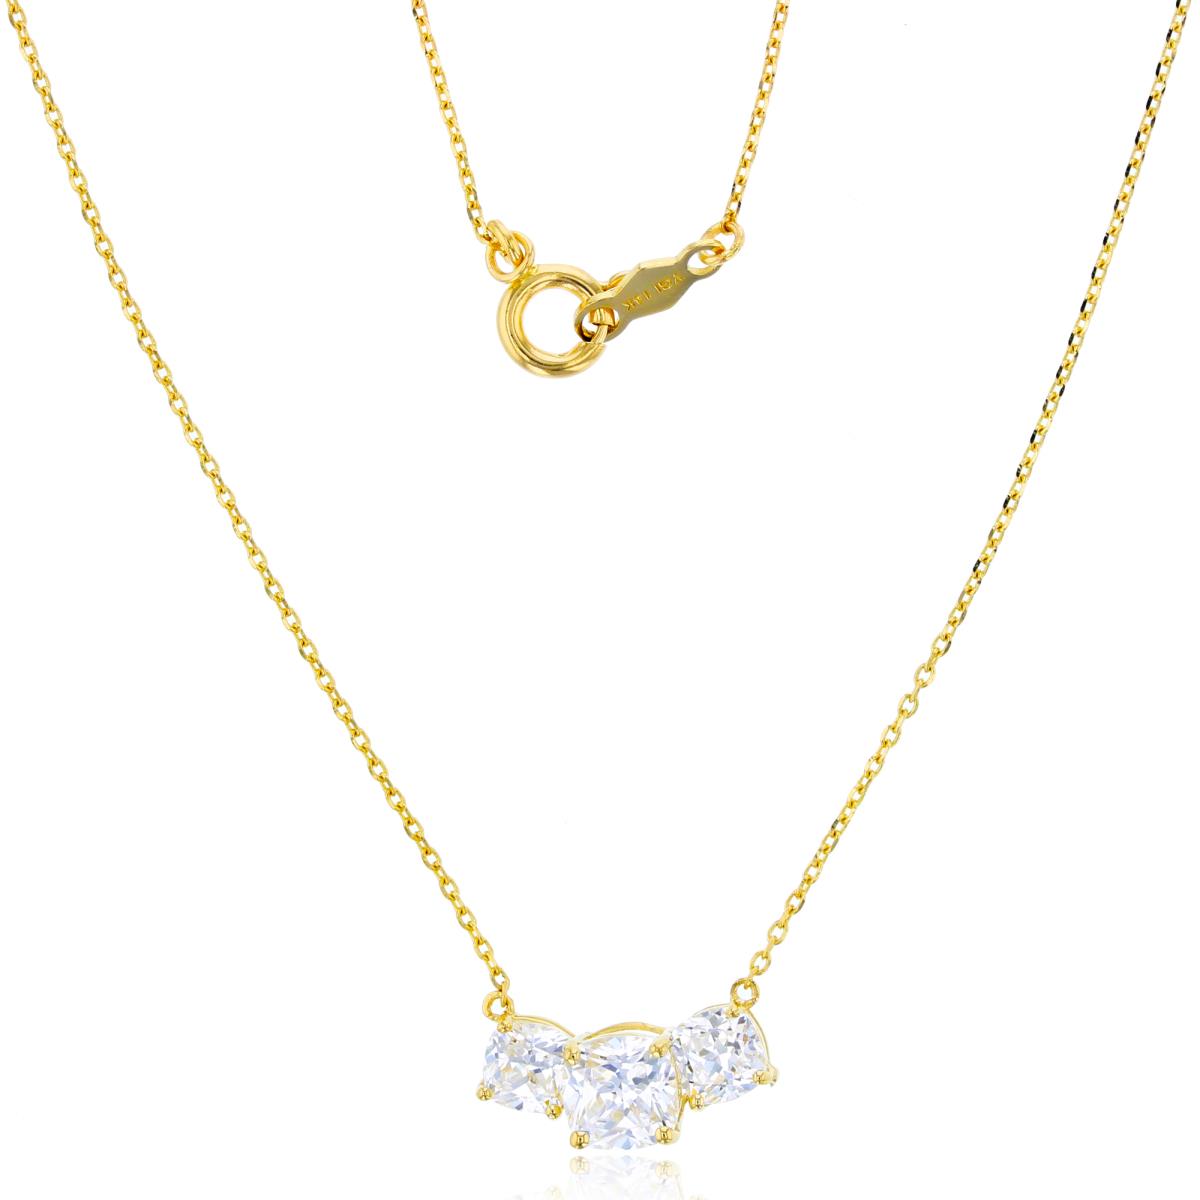 14K Yellow Gold 5mm/4mm Cu CZ 3-Stones Bar 18"Necklace